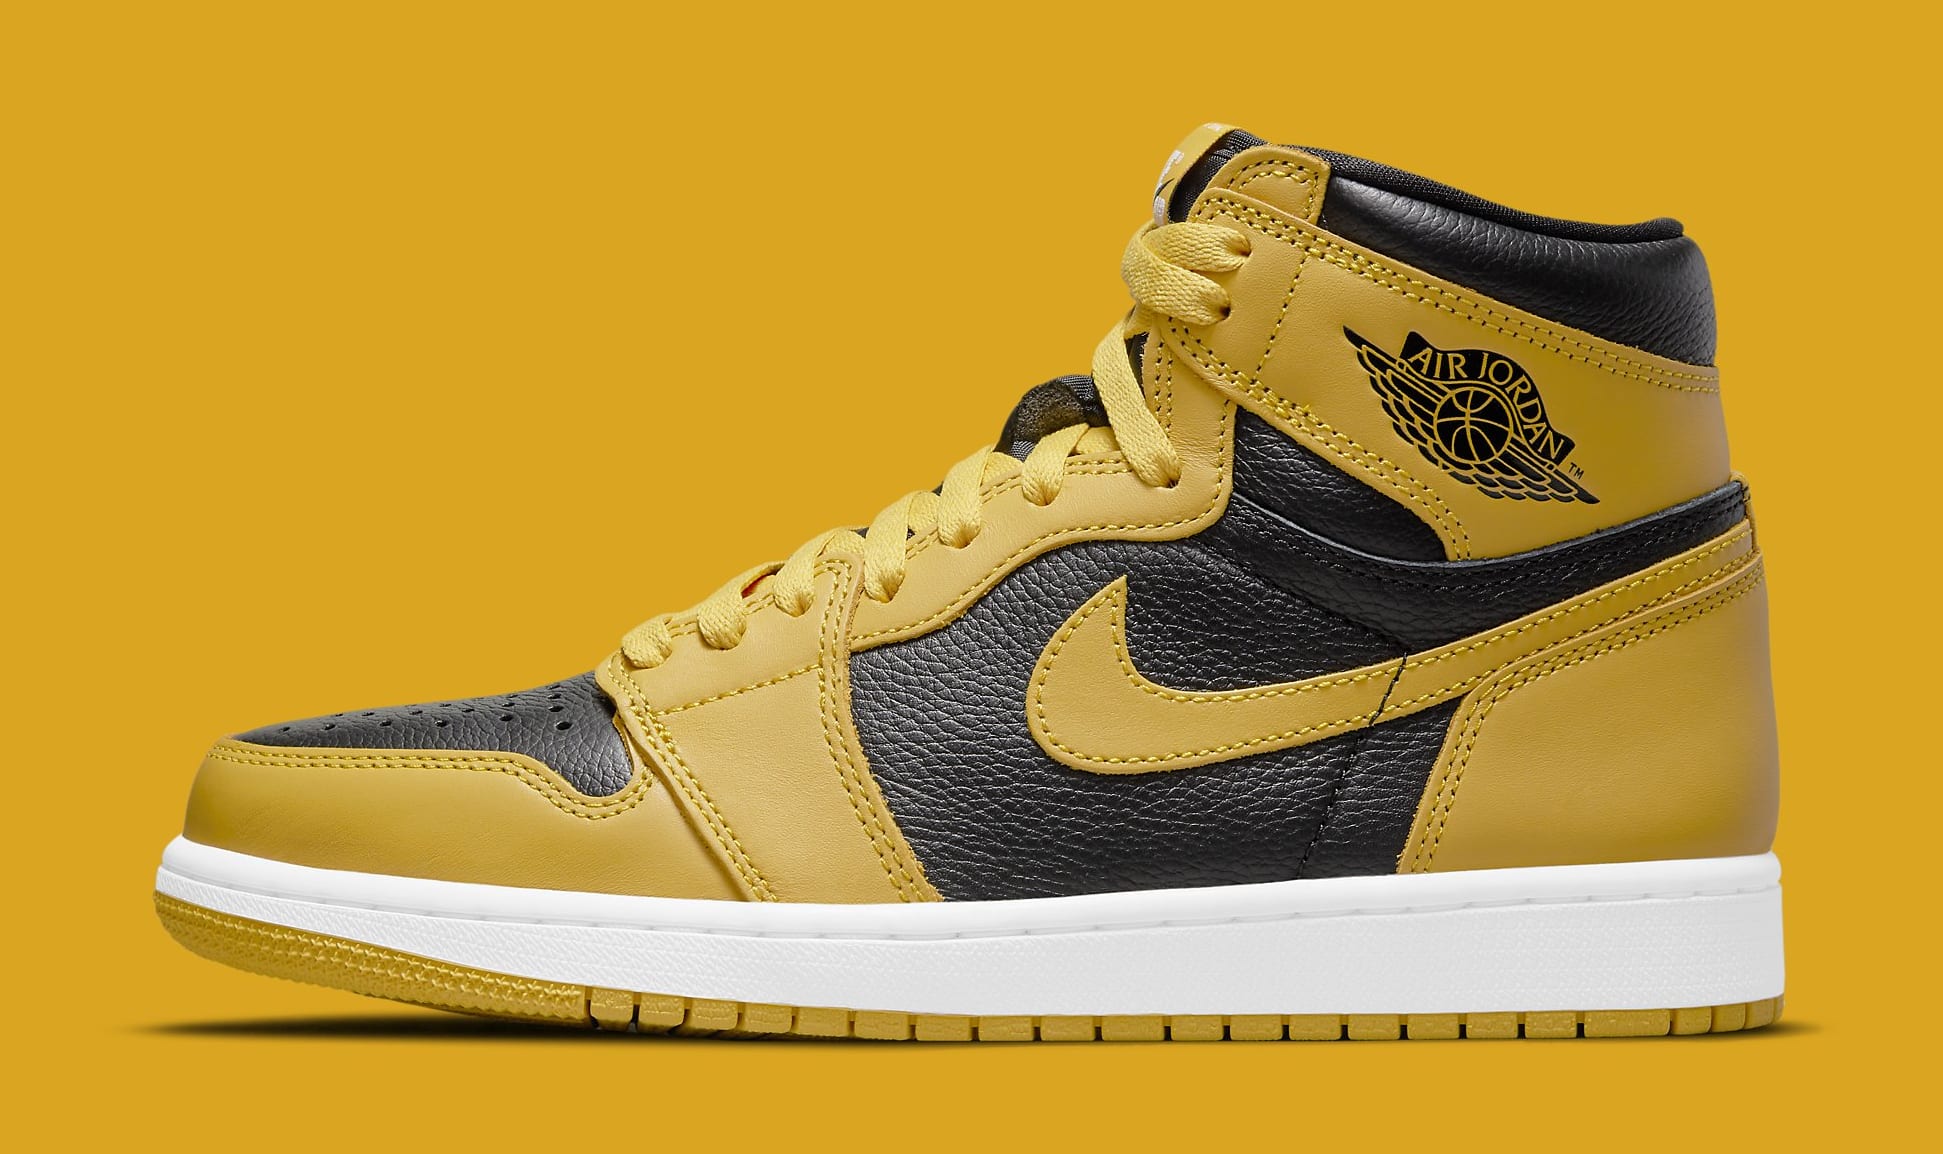 Best Look Yet at the 'Pollen' Air Jordan 1 High New colorway slated to